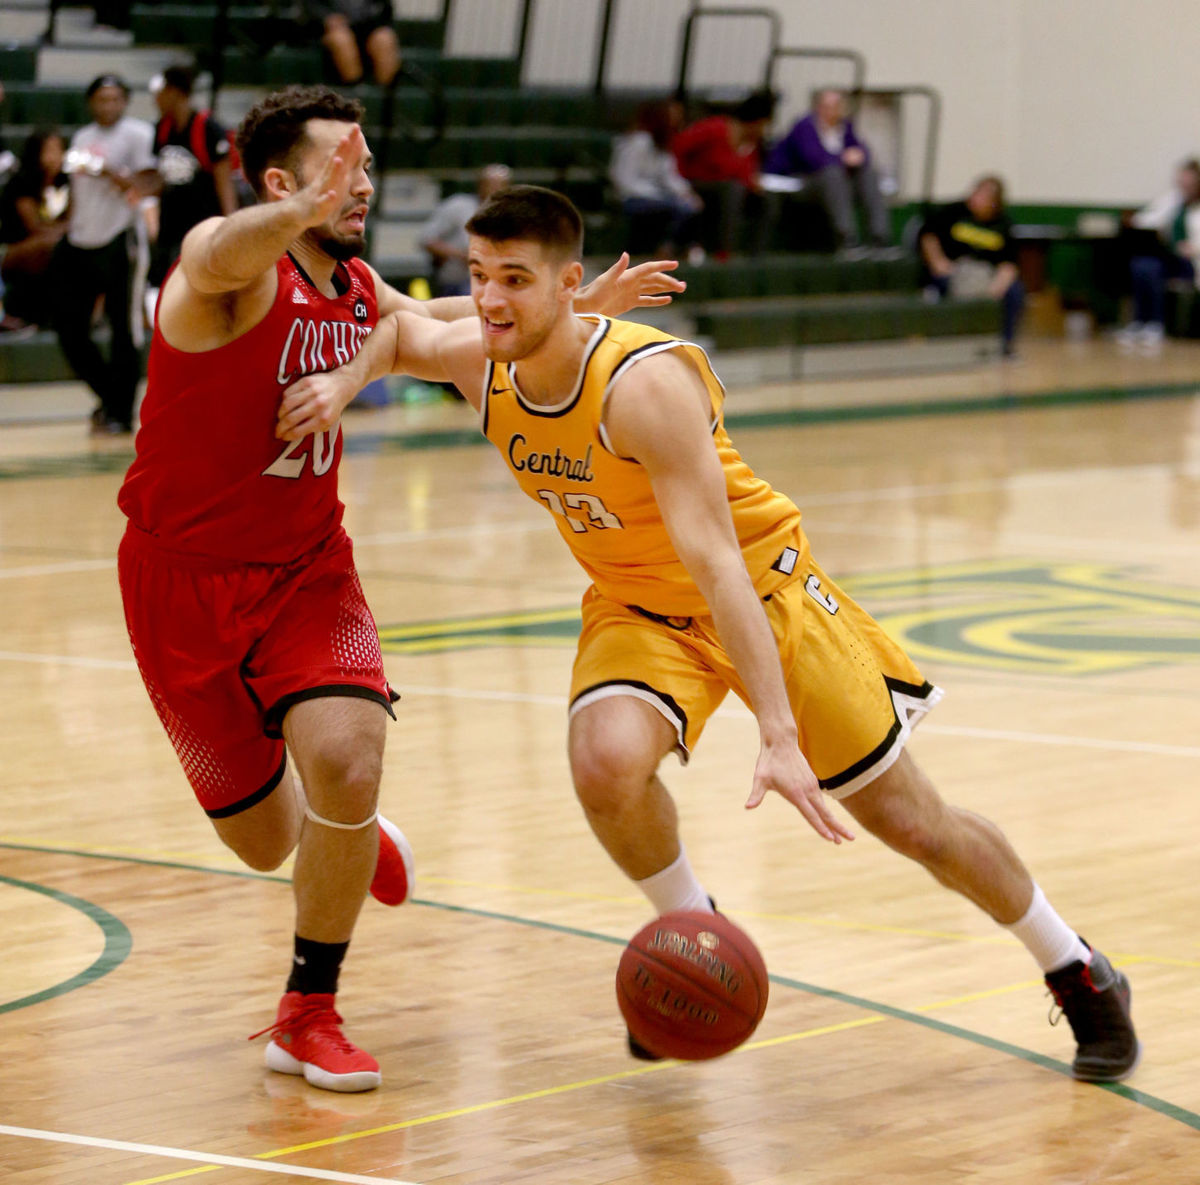 Central Arizona College’s Mattia Cafisi, right, drives against Cochise’s Bryan Urrutia during Wednesday night’s game at the George Young Activity Center.
Oscar Perez/PinalCentral